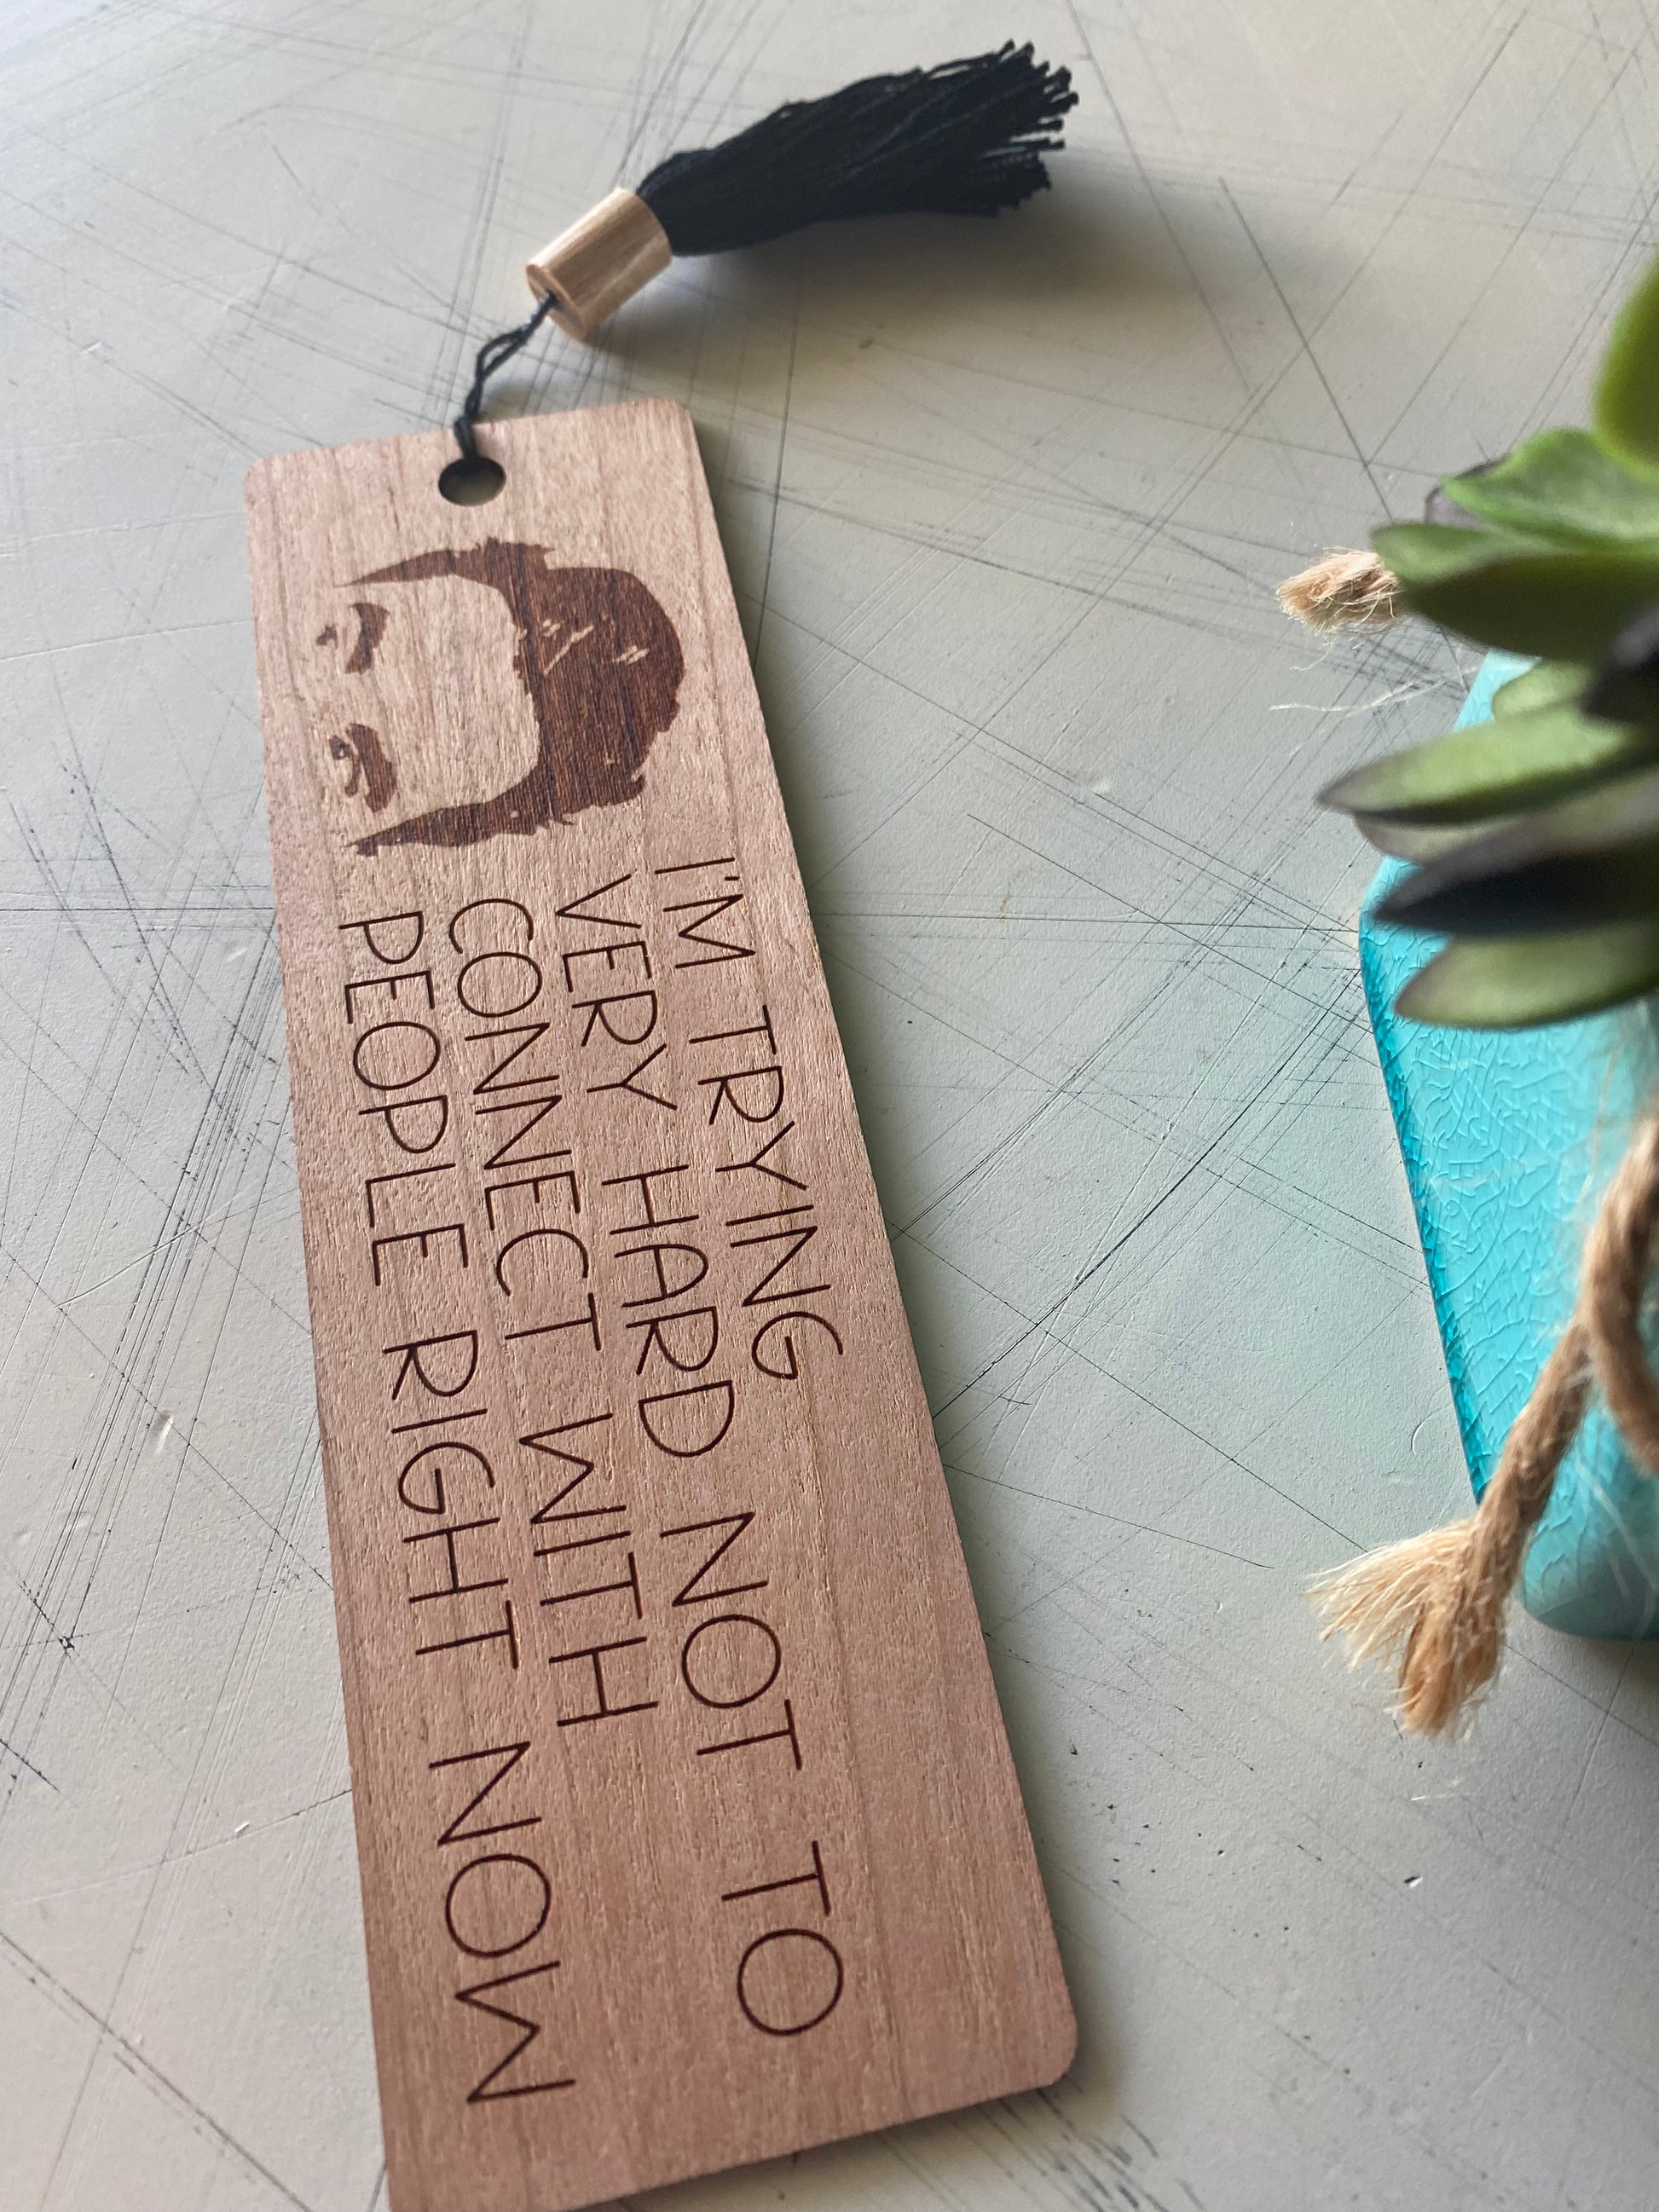 I'm trying very hard not to connect with people right now - Novotny Designs - wood bookmark